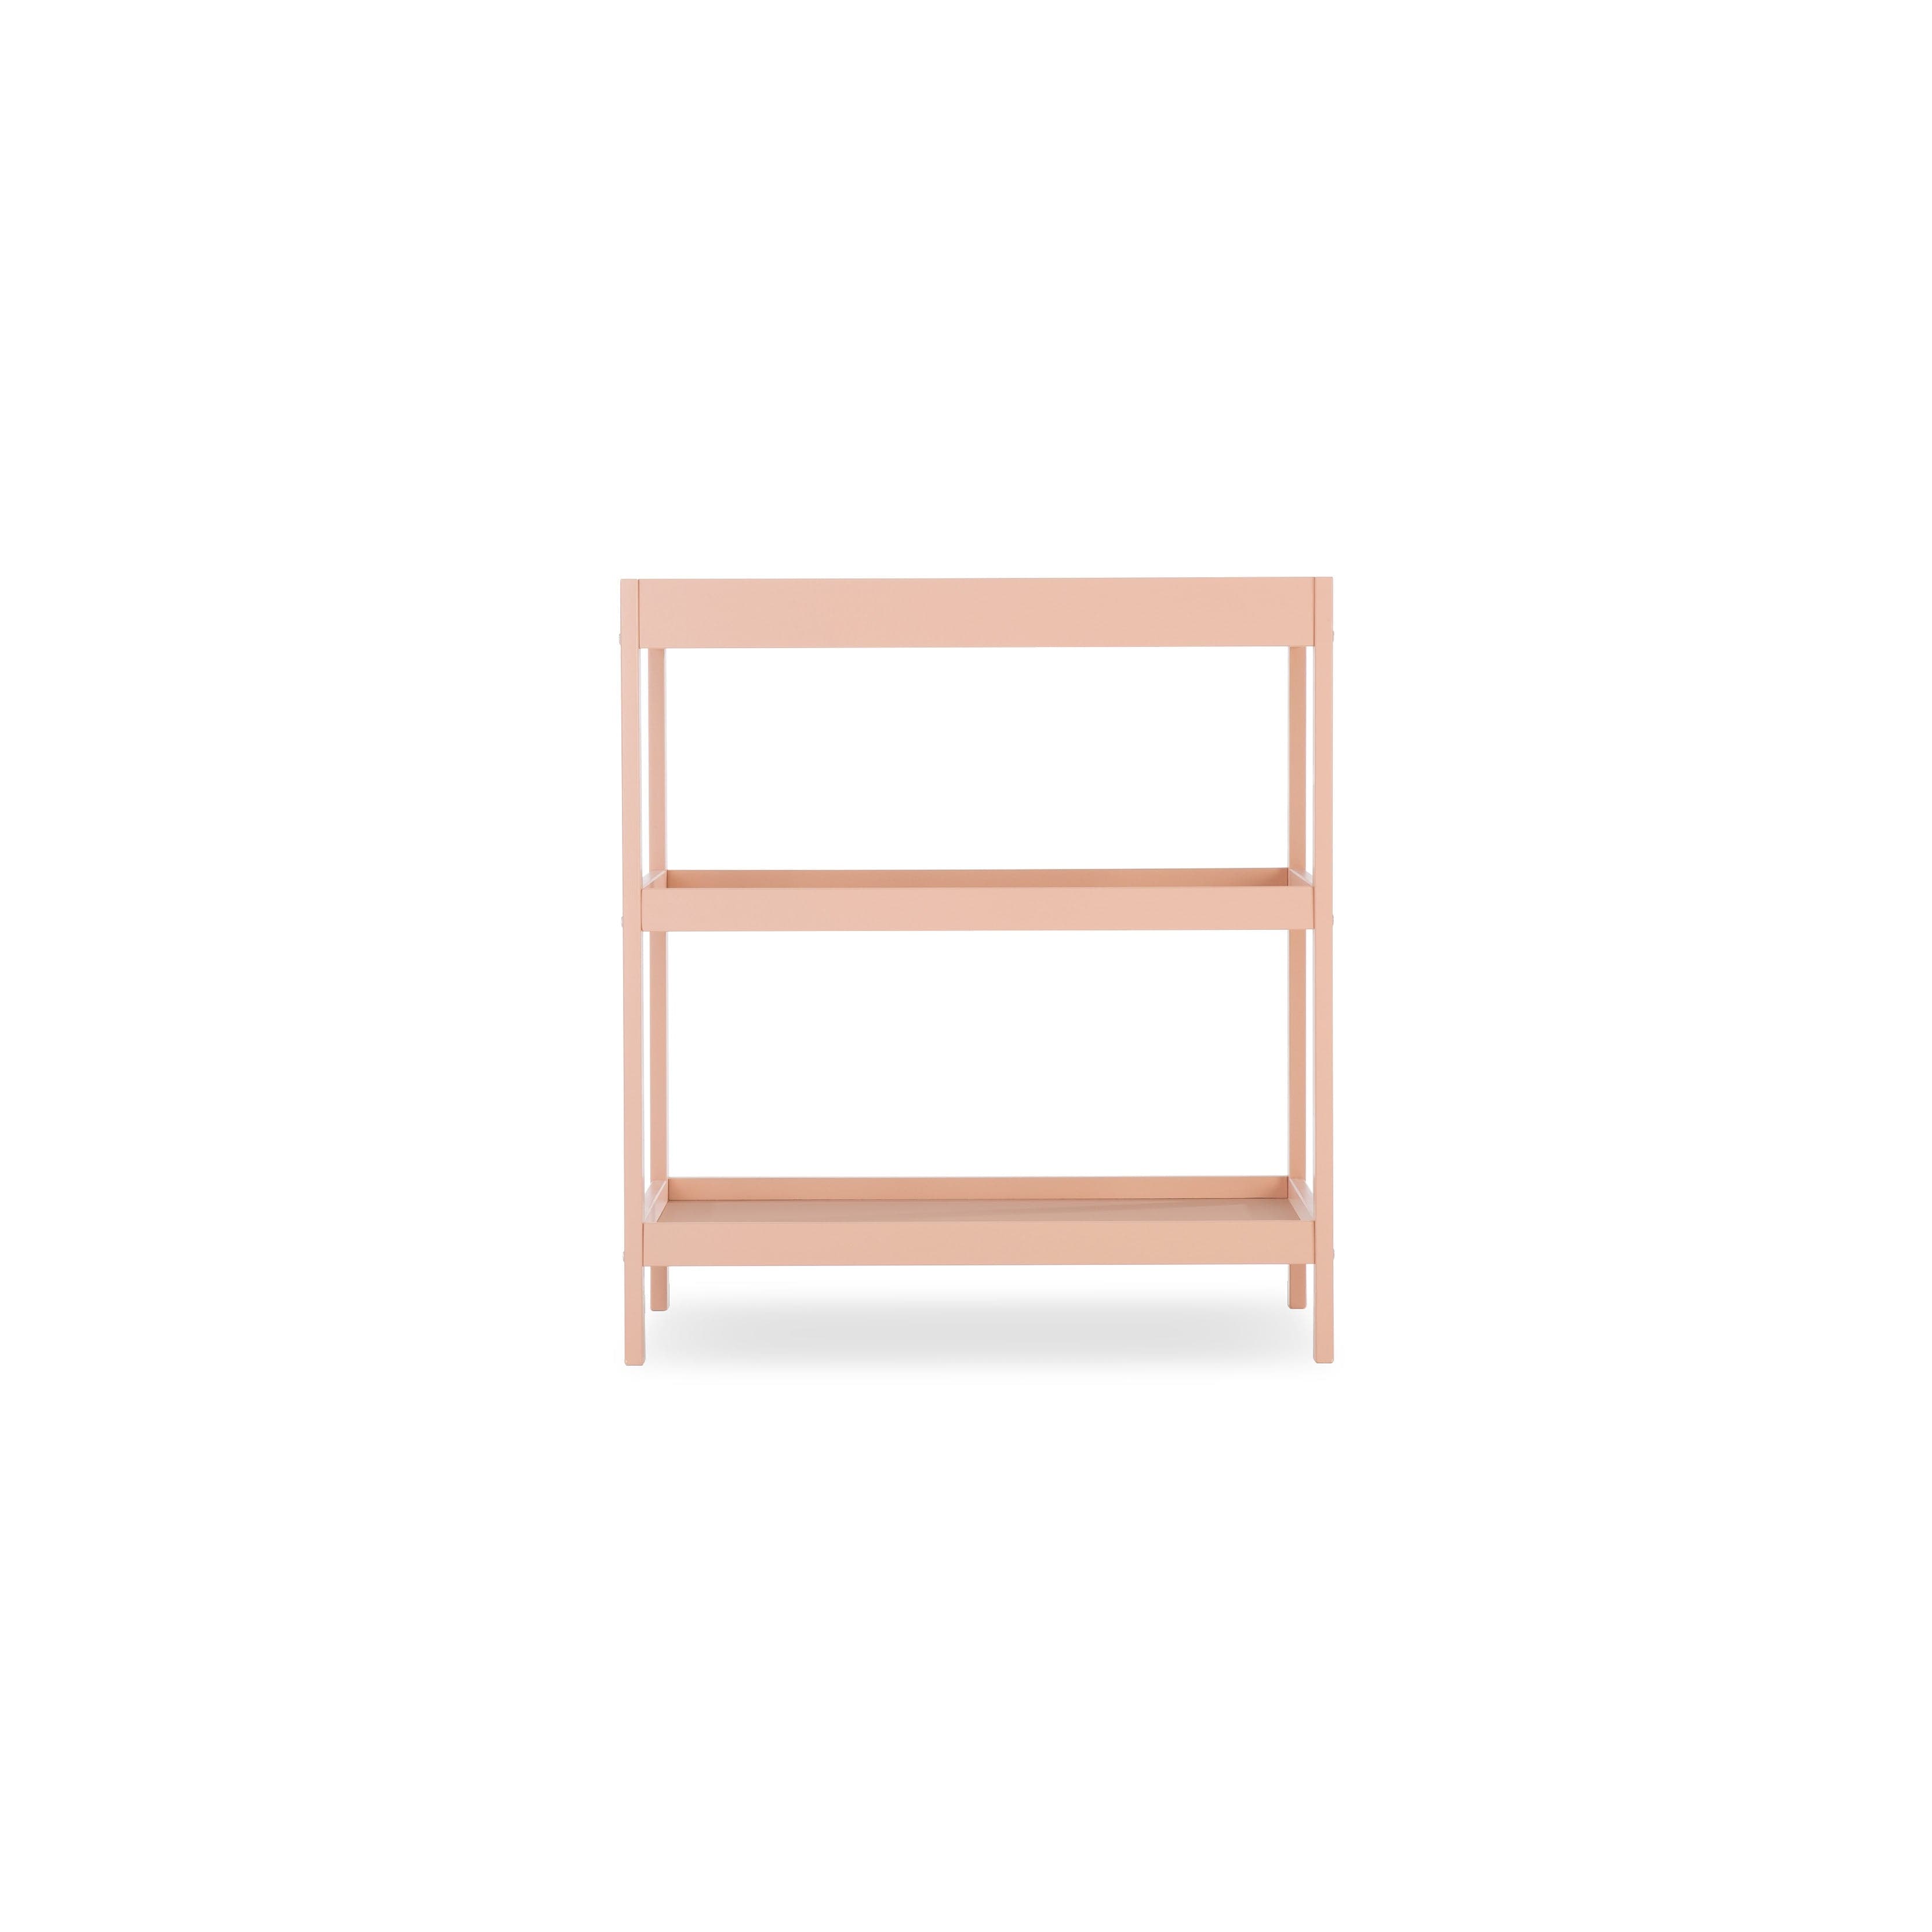 Cuddleco Nola 2 Piece Nursery Furniture Set - Blush Pink -  | For Your Little One